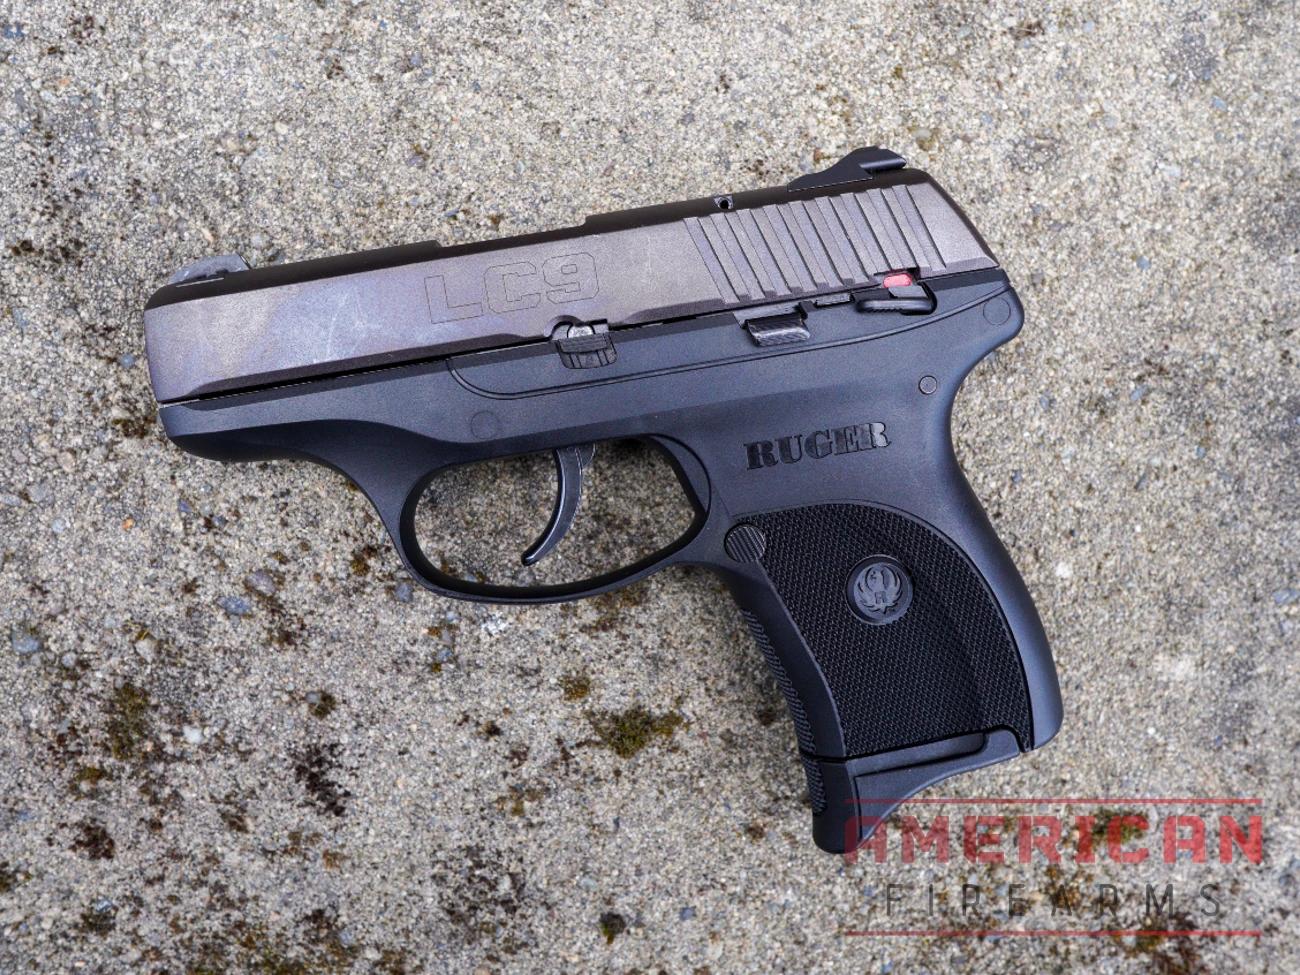 The LC9 isn't bad looking -- the edges are smooth and rounded, and it feels good in the hands. This also makes it more comfortable for concealed carry,